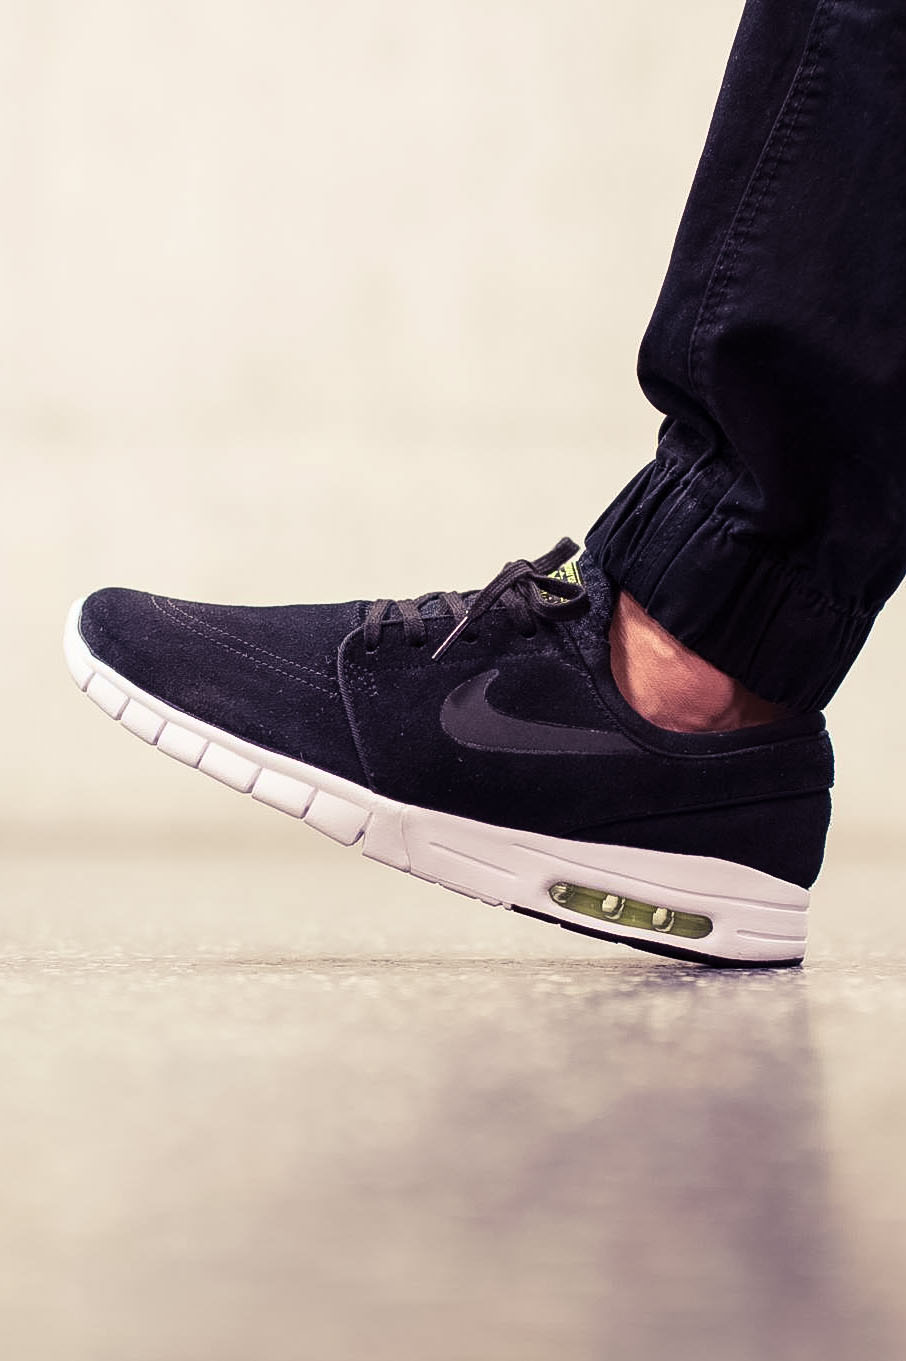 Max Suede #leather #nike #sneakers